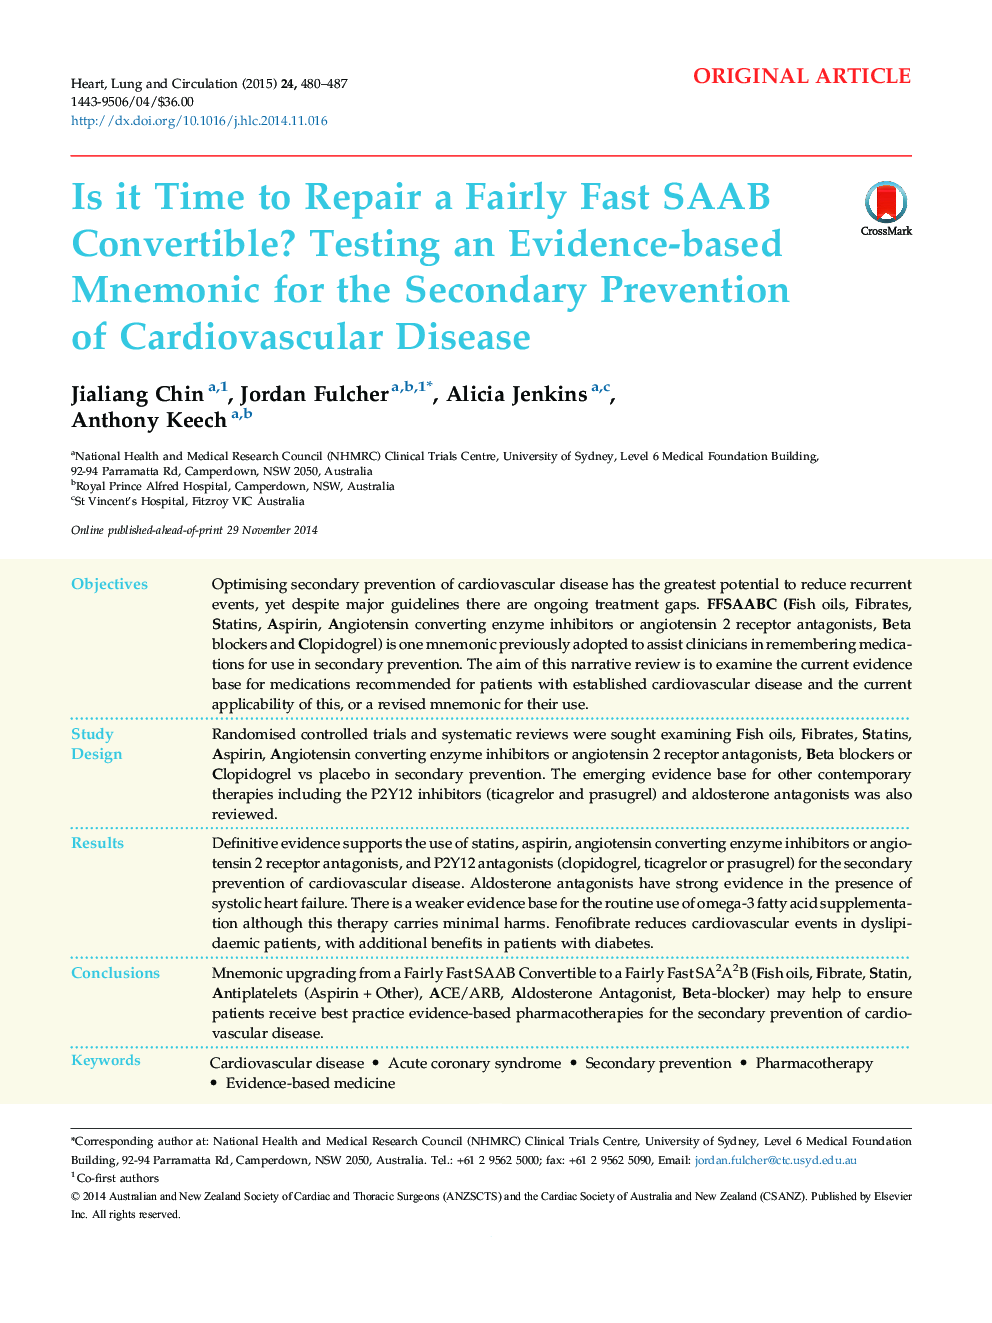 Is it Time to Repair a Fairly Fast SAAB Convertible? Testing an Evidence-based Mnemonic for the Secondary Prevention of Cardiovascular Disease